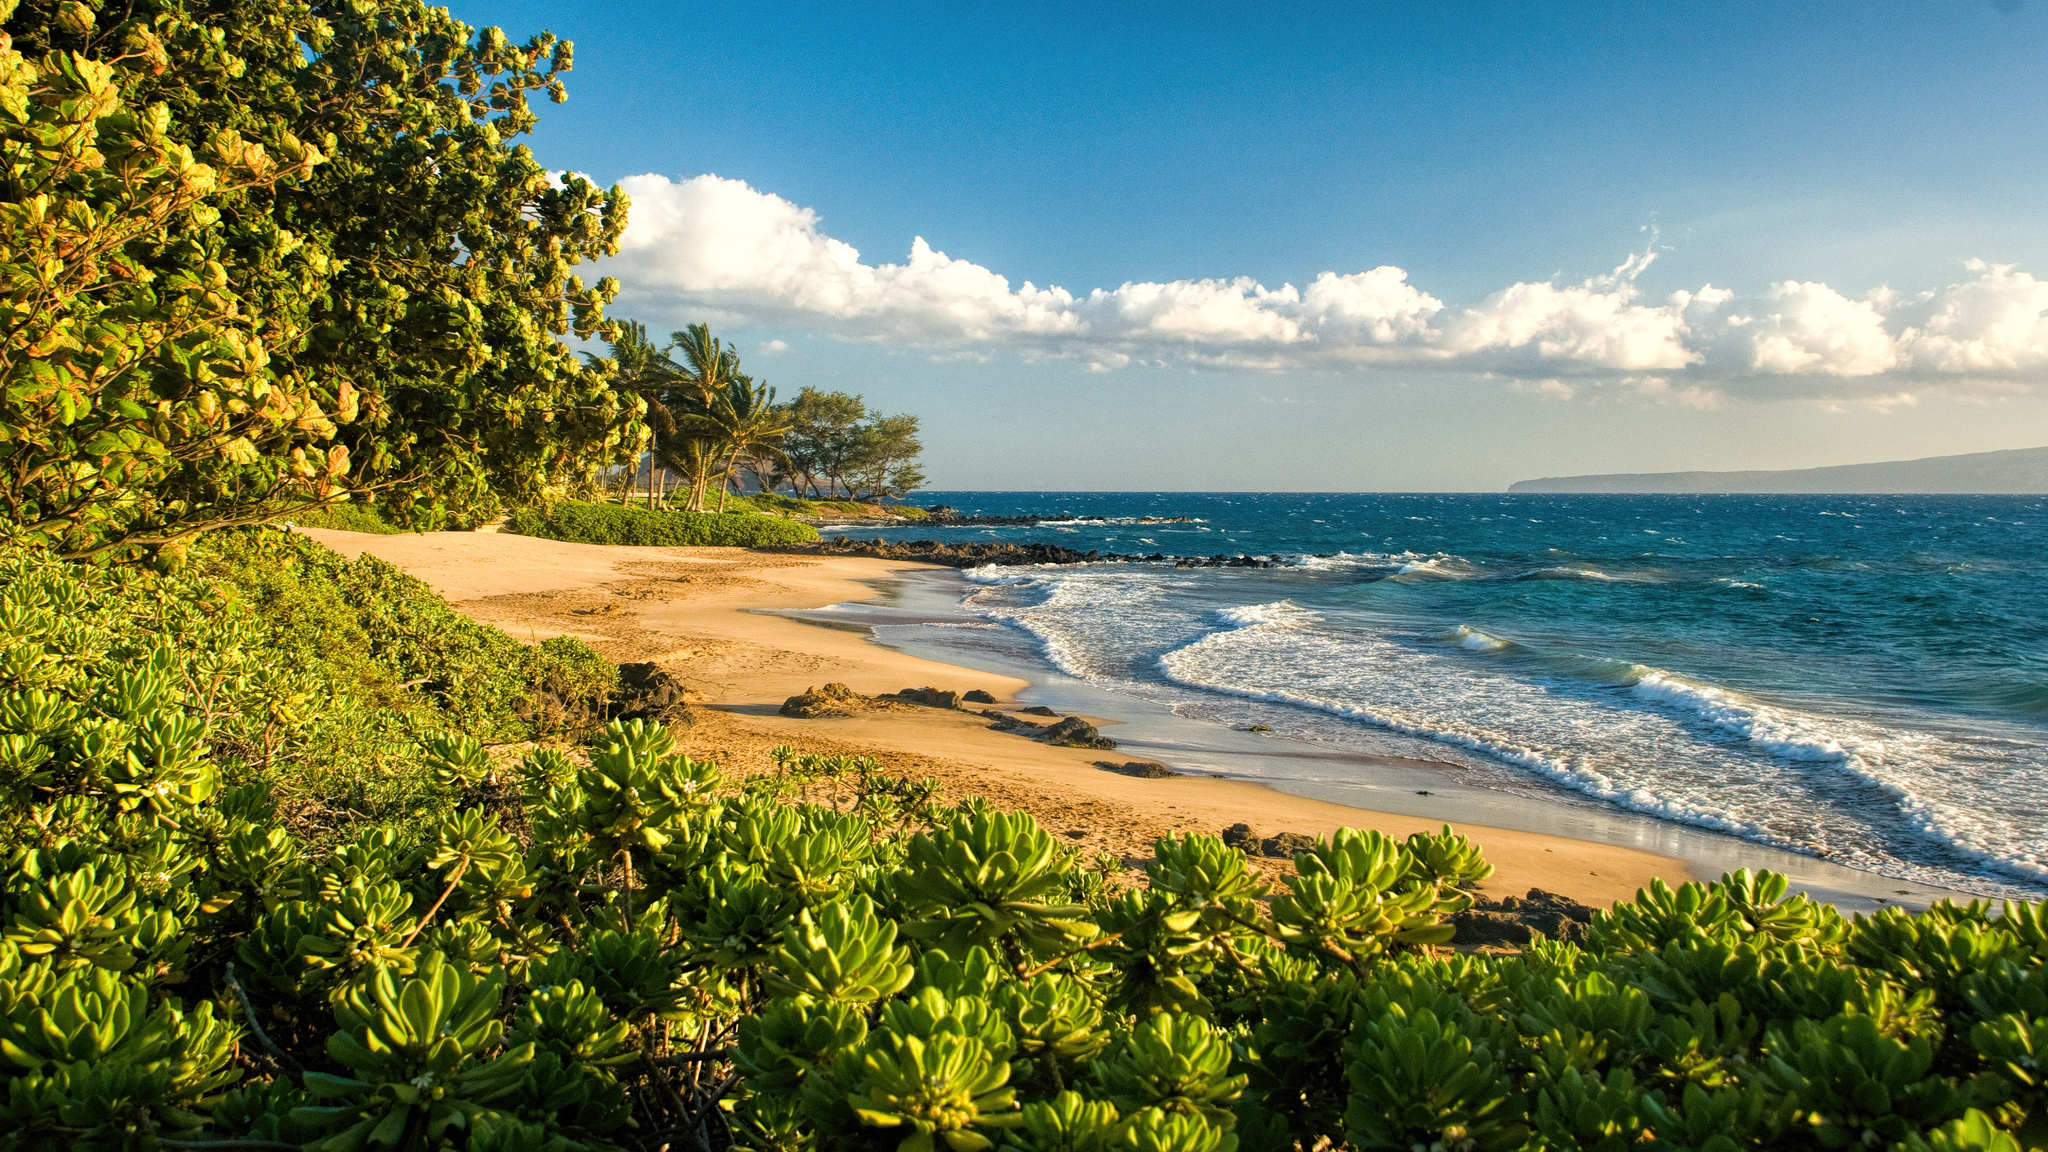 Top 10 Maui Island Wallpapers You Never Seen Before